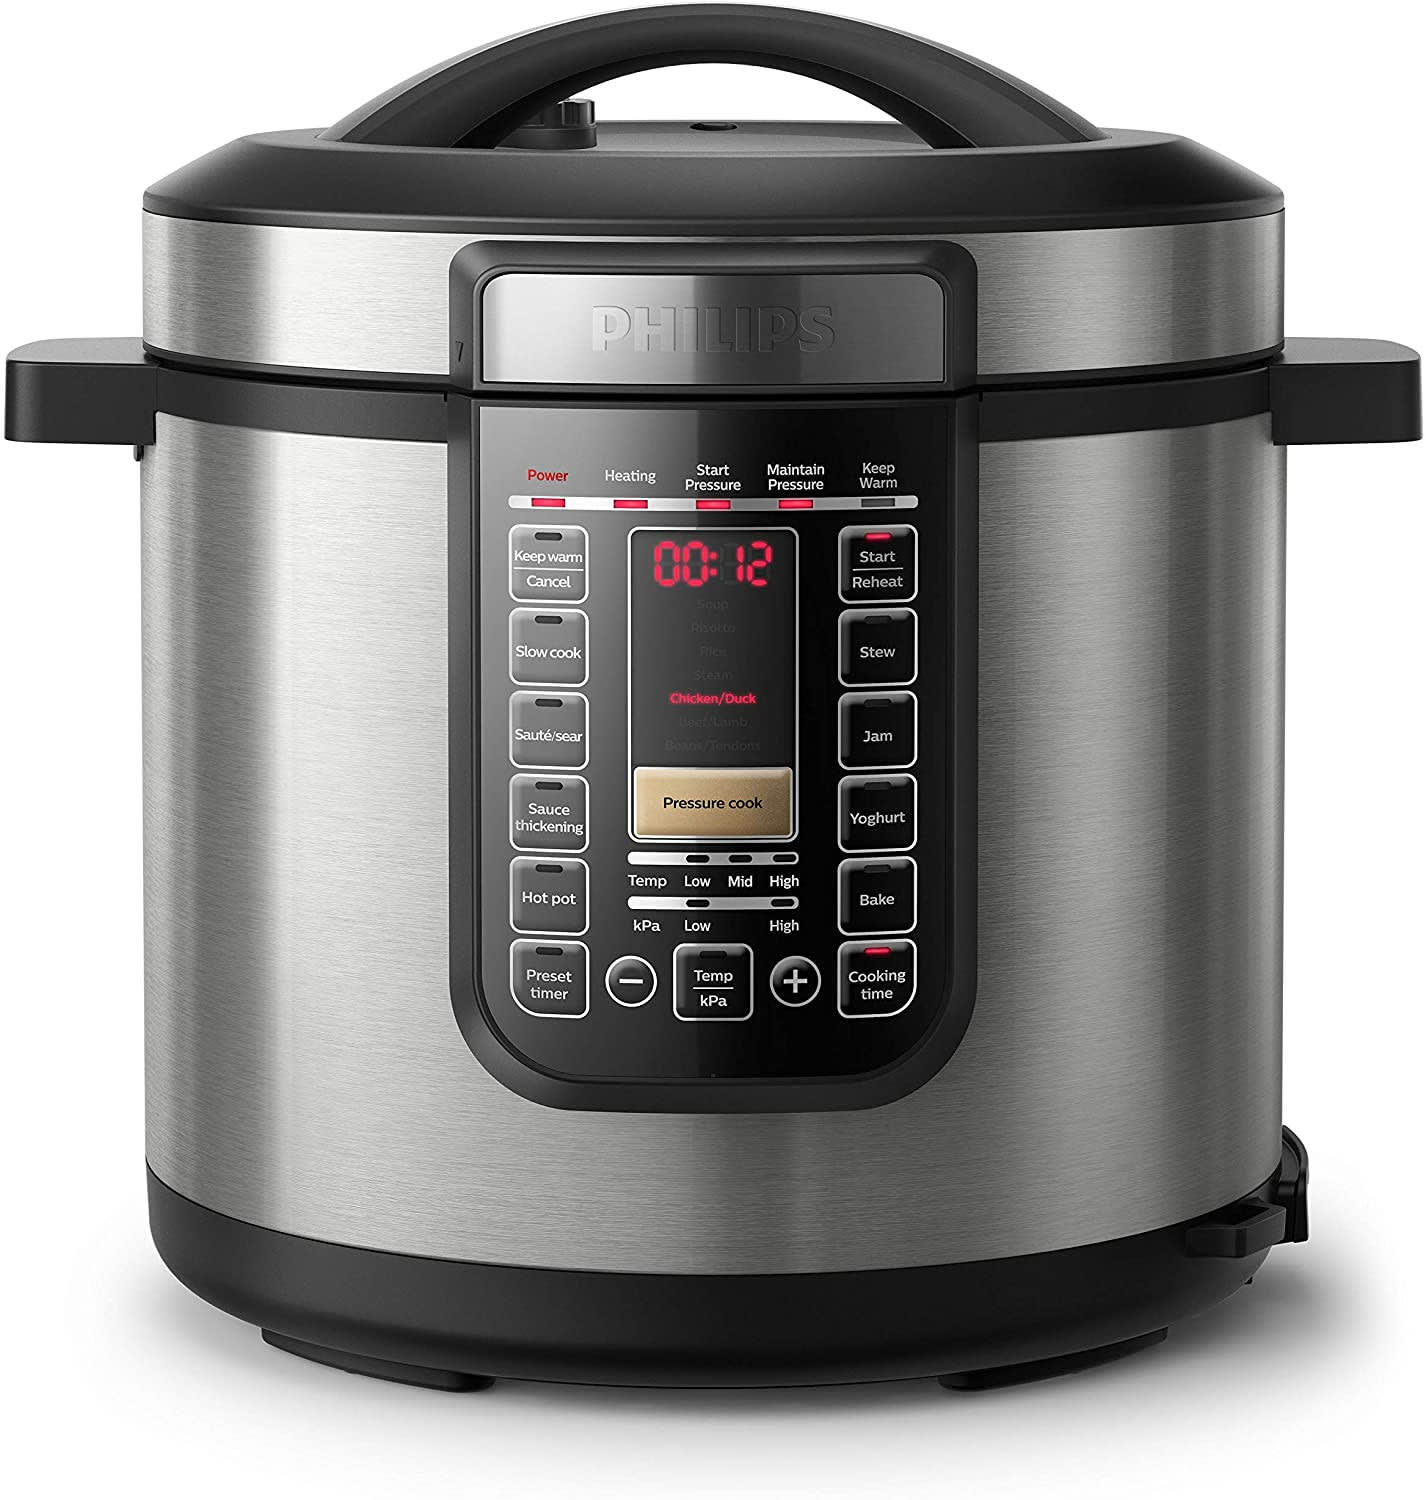 Philips HD2774 All-in-One Slow Cooker